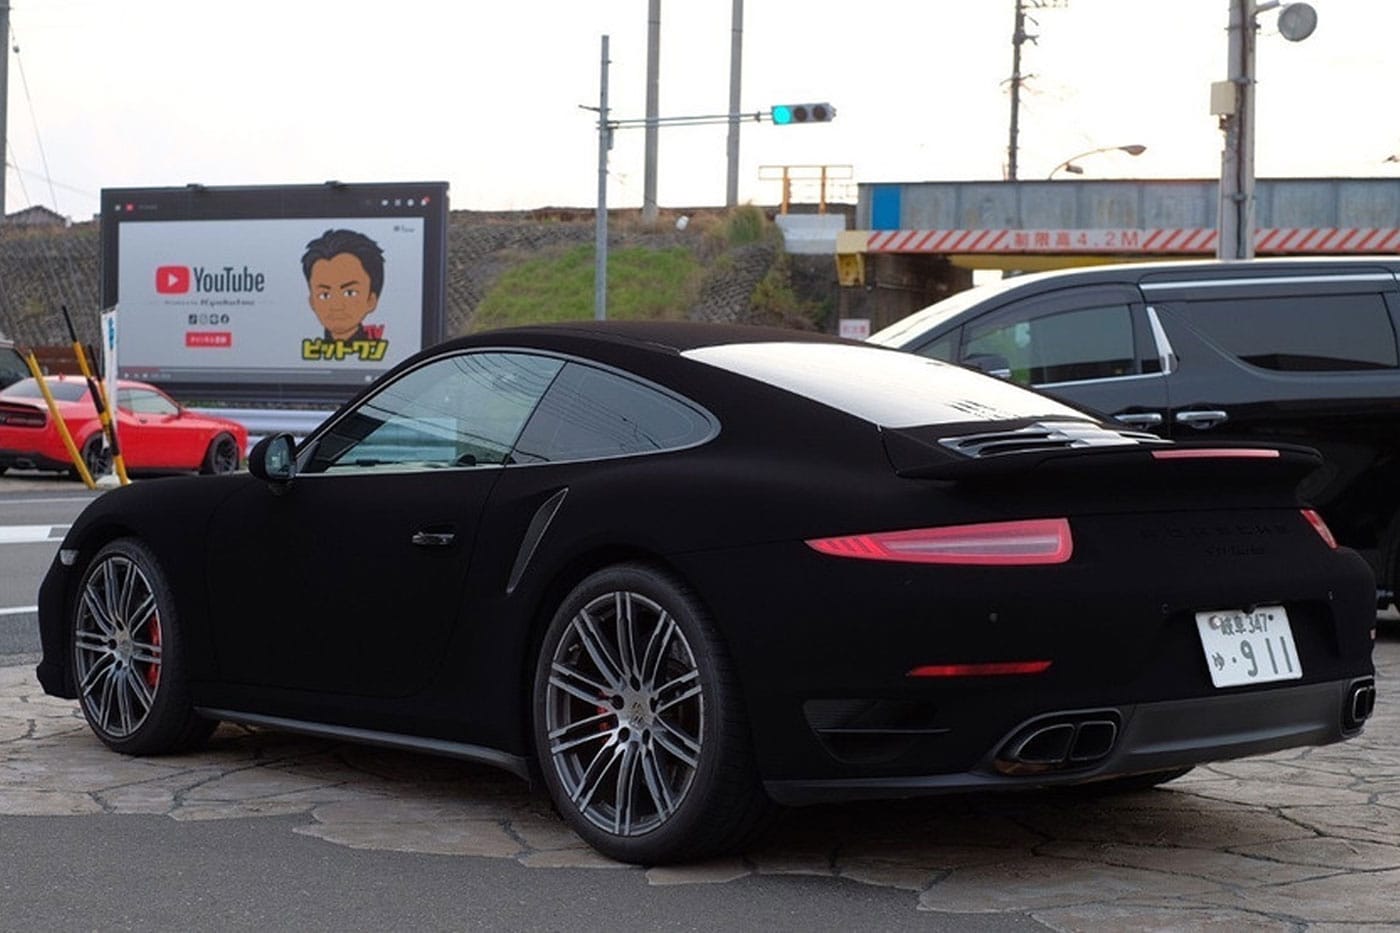 Pit One Covers a Porsche 911 in the World's Blackest Paint